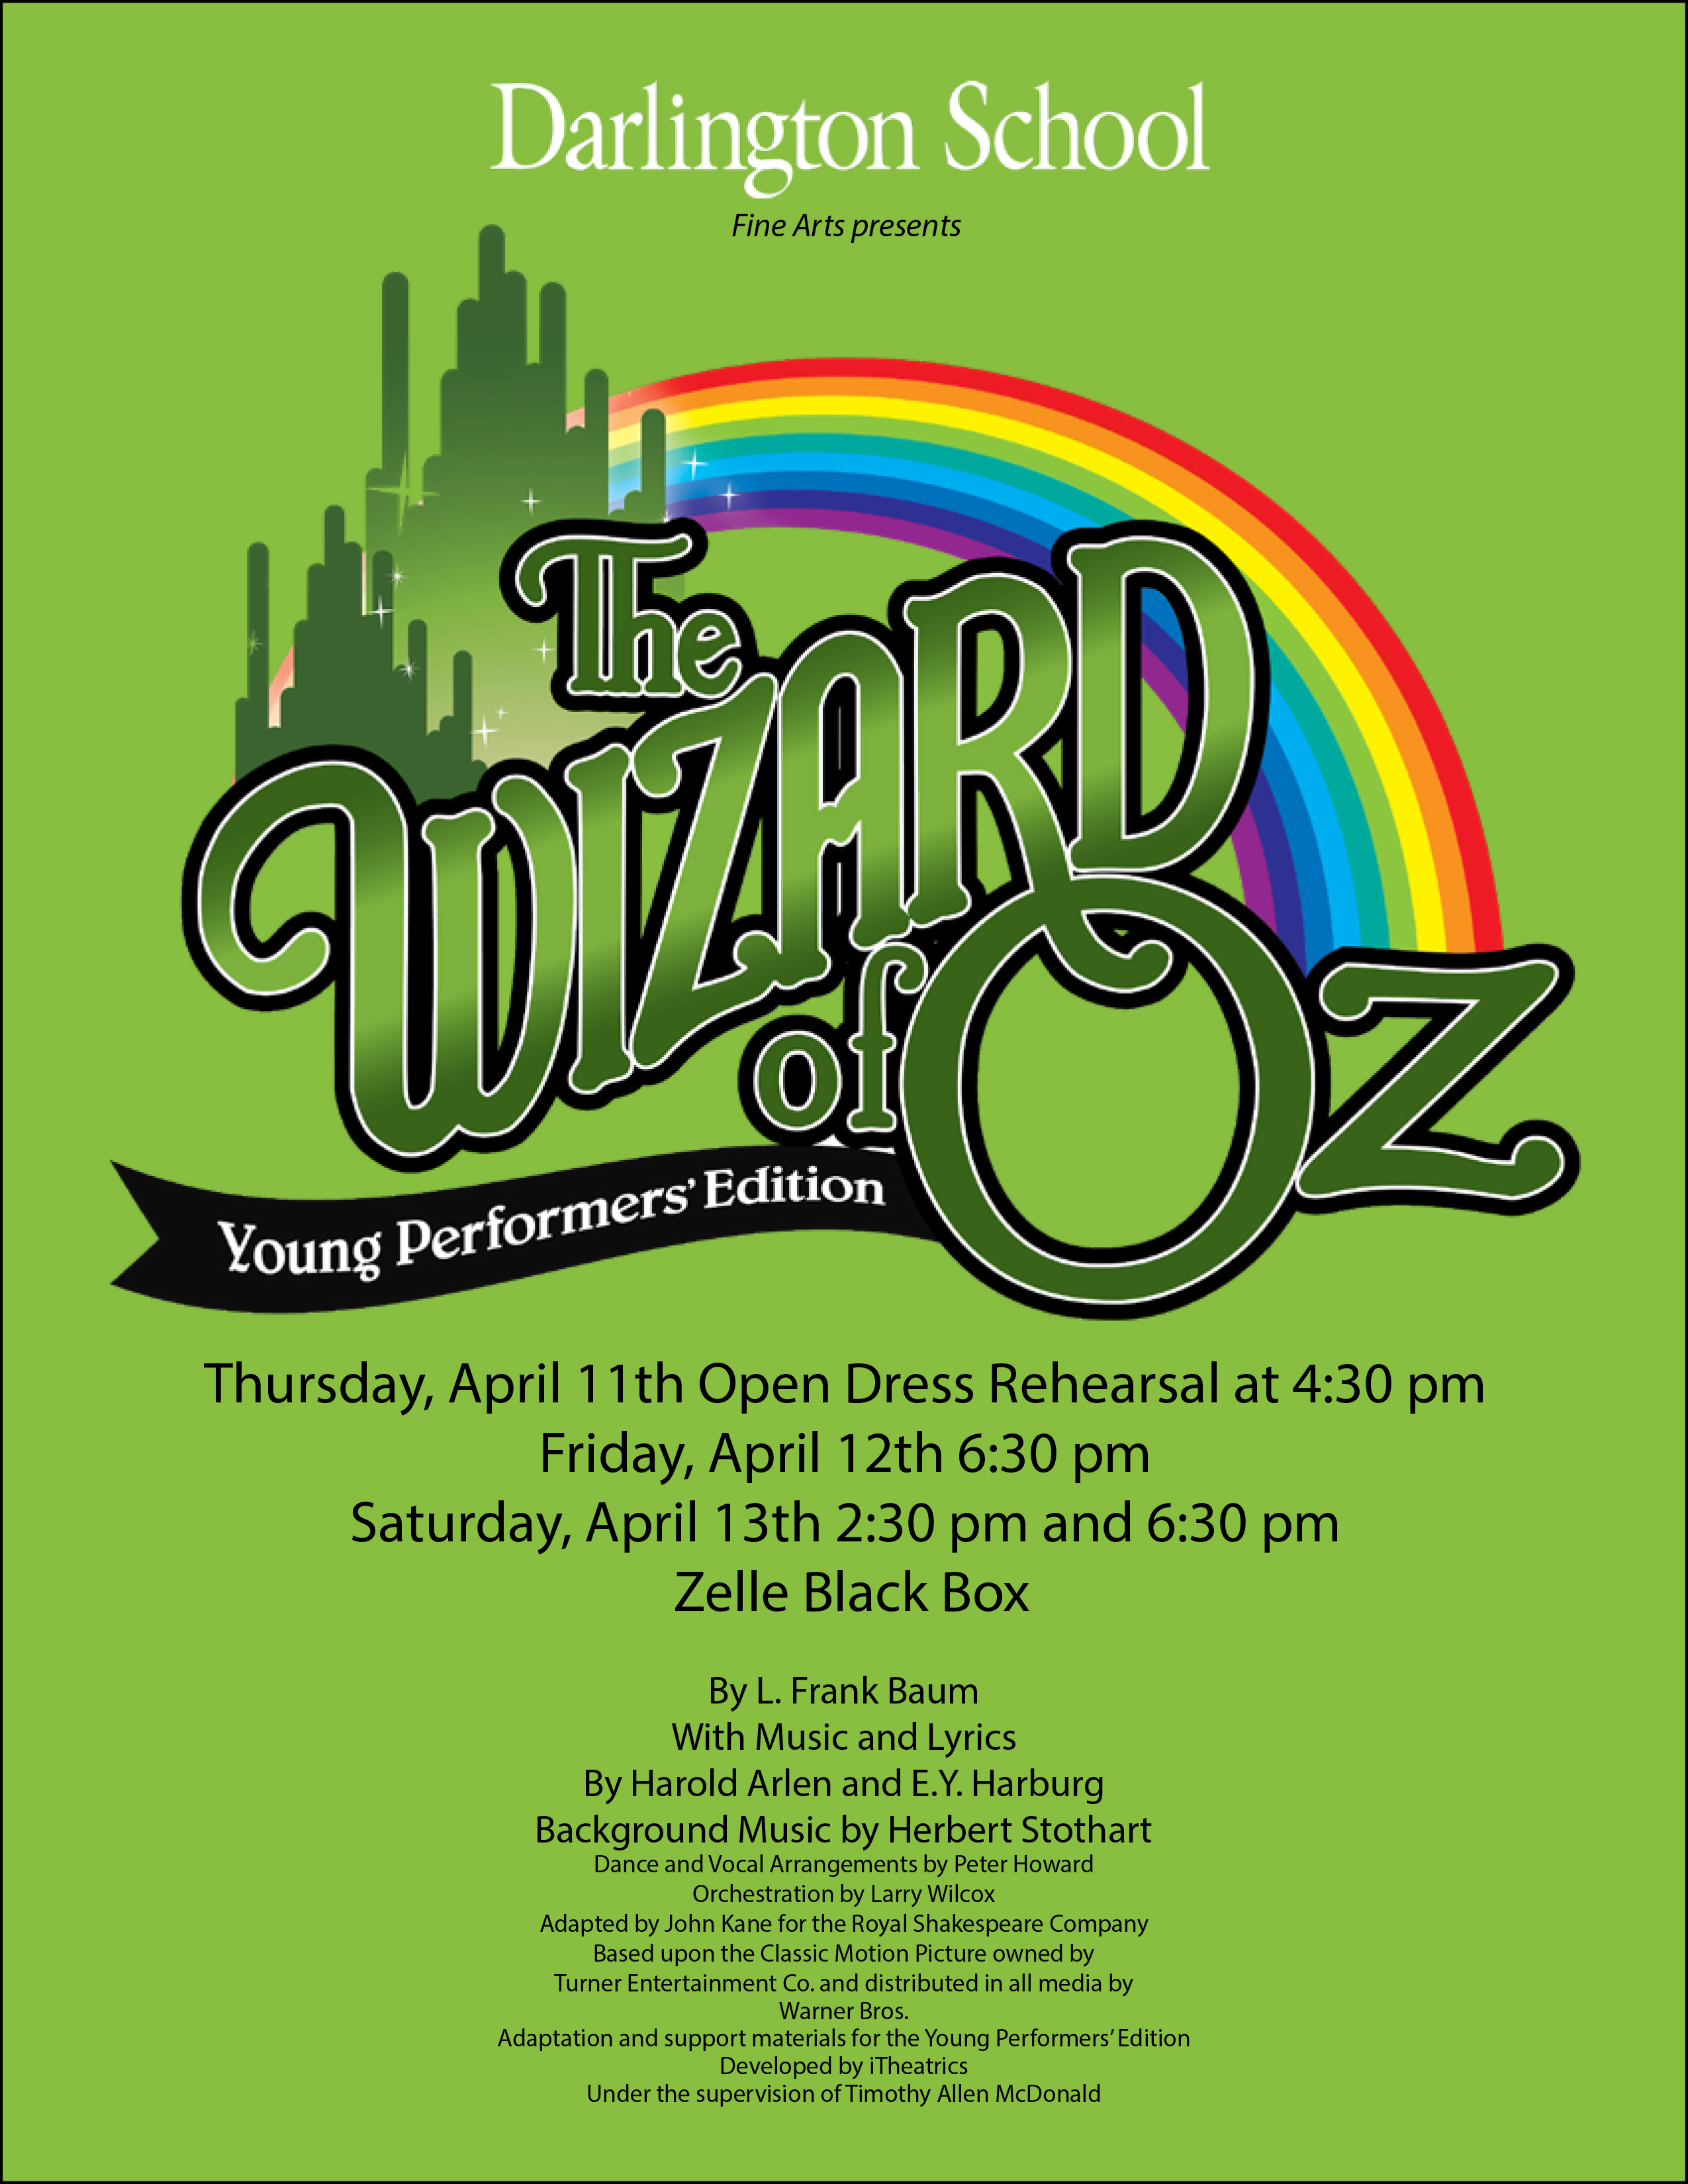 Click here to reserve seats for "The Wizard of Oz"